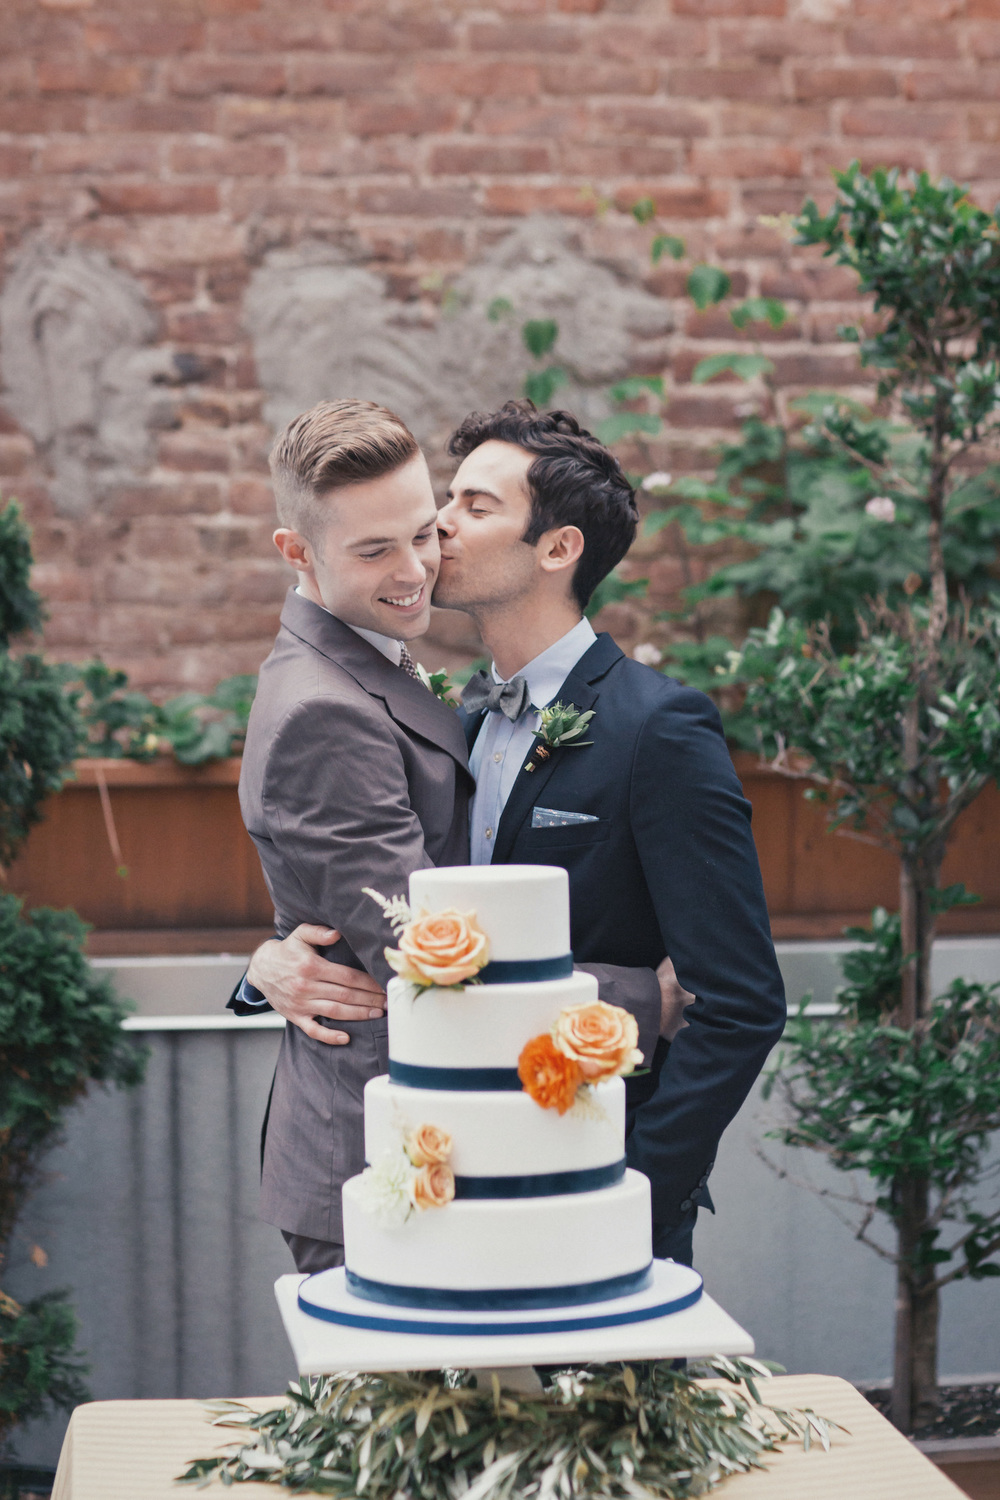  Thursday, June 12, 2014 Styled shoot in DUMBO Brooklyn, NY and Midtown Manhattan. 